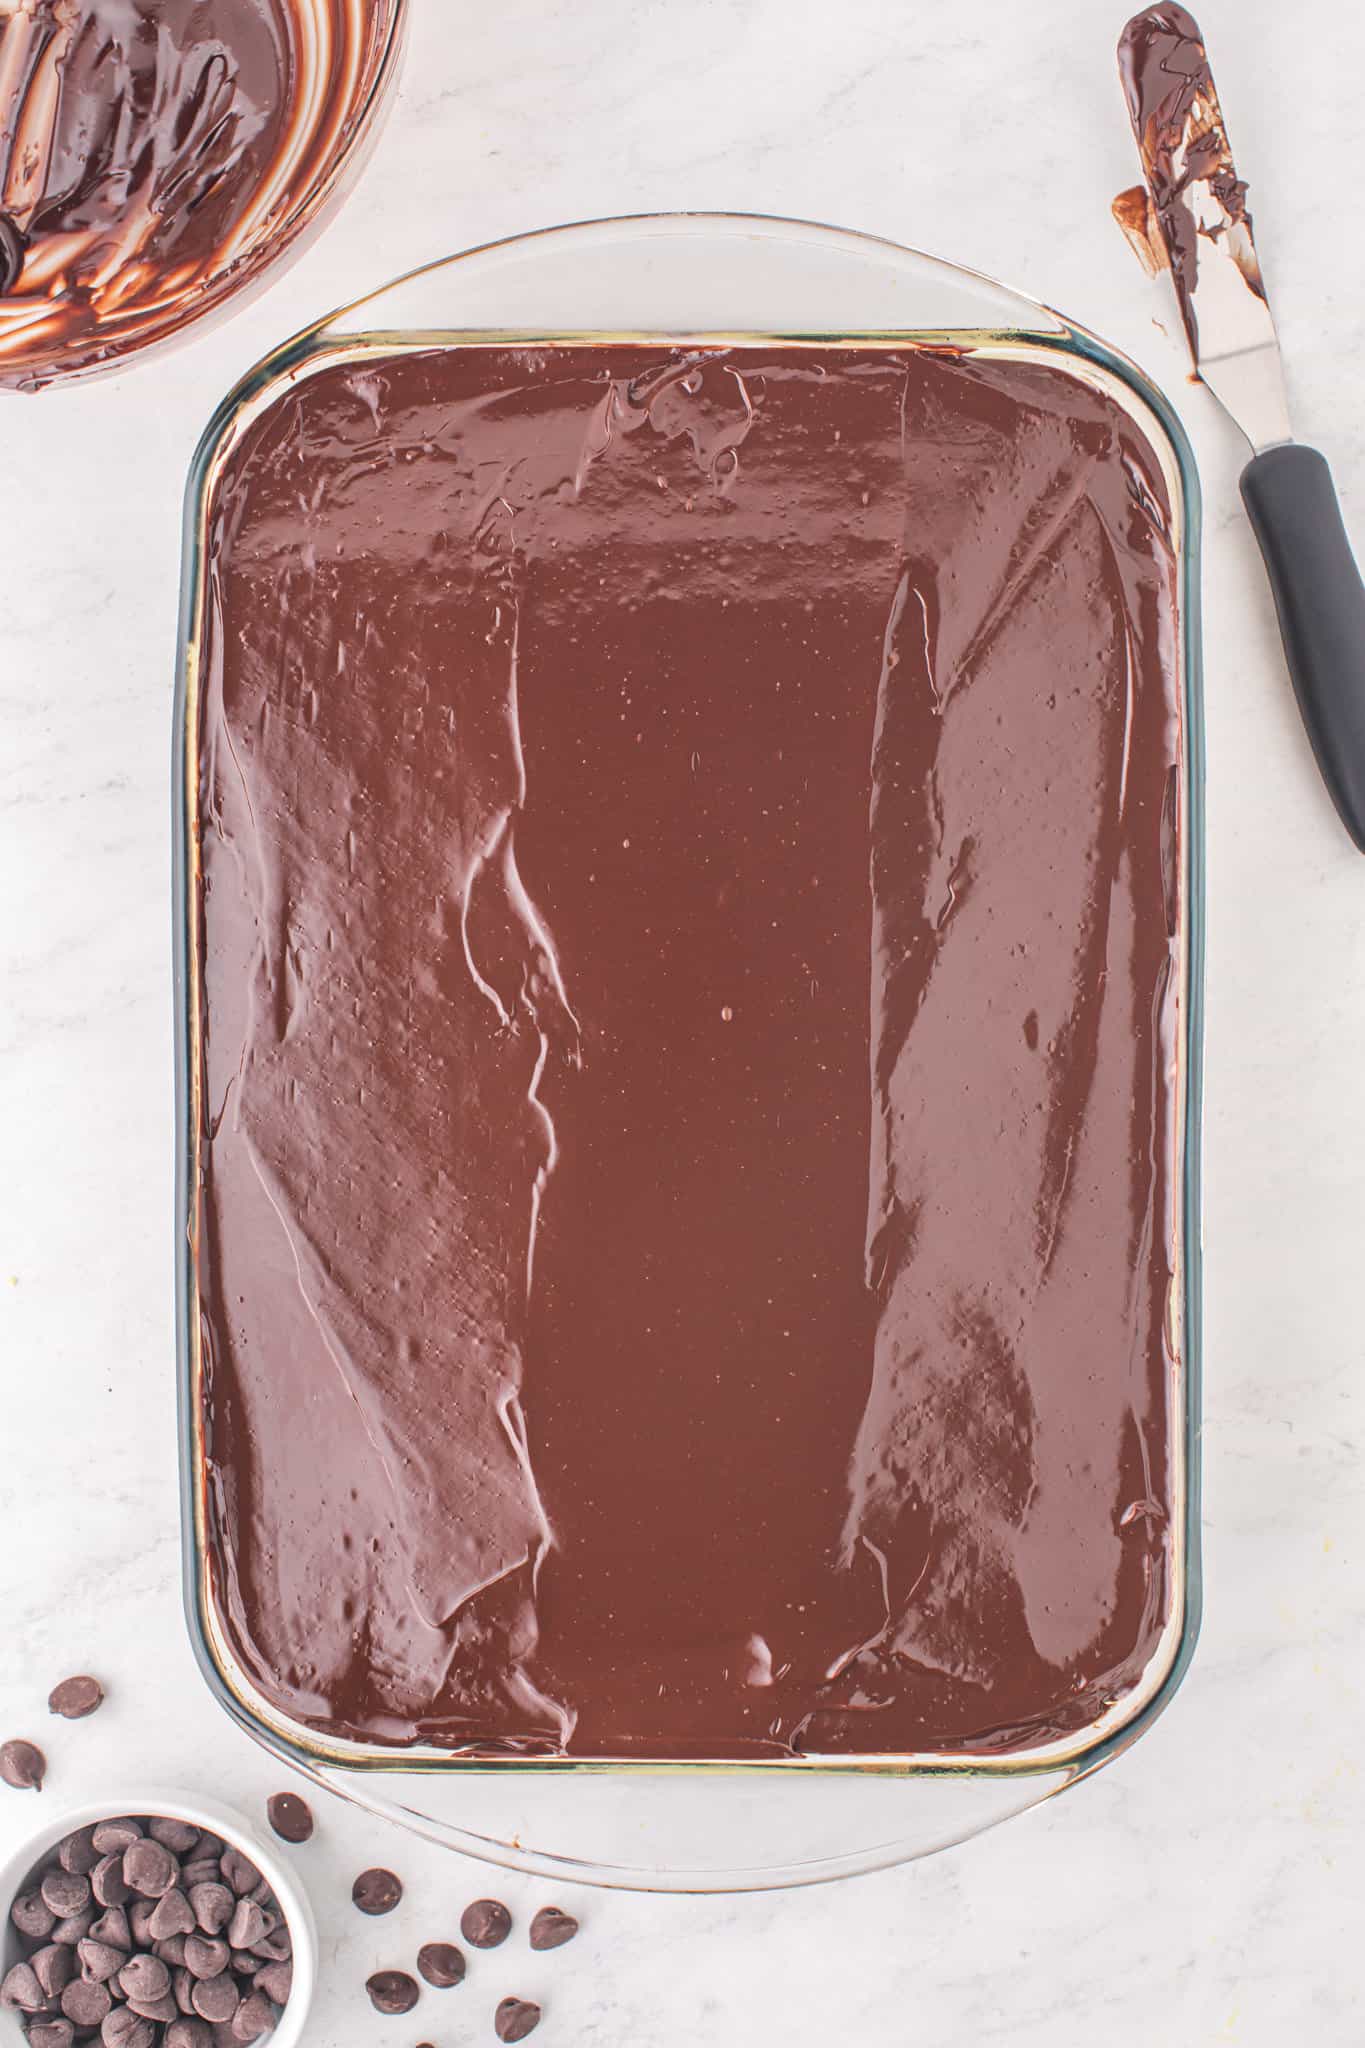 melted chocolate spread over cake in a baking dish